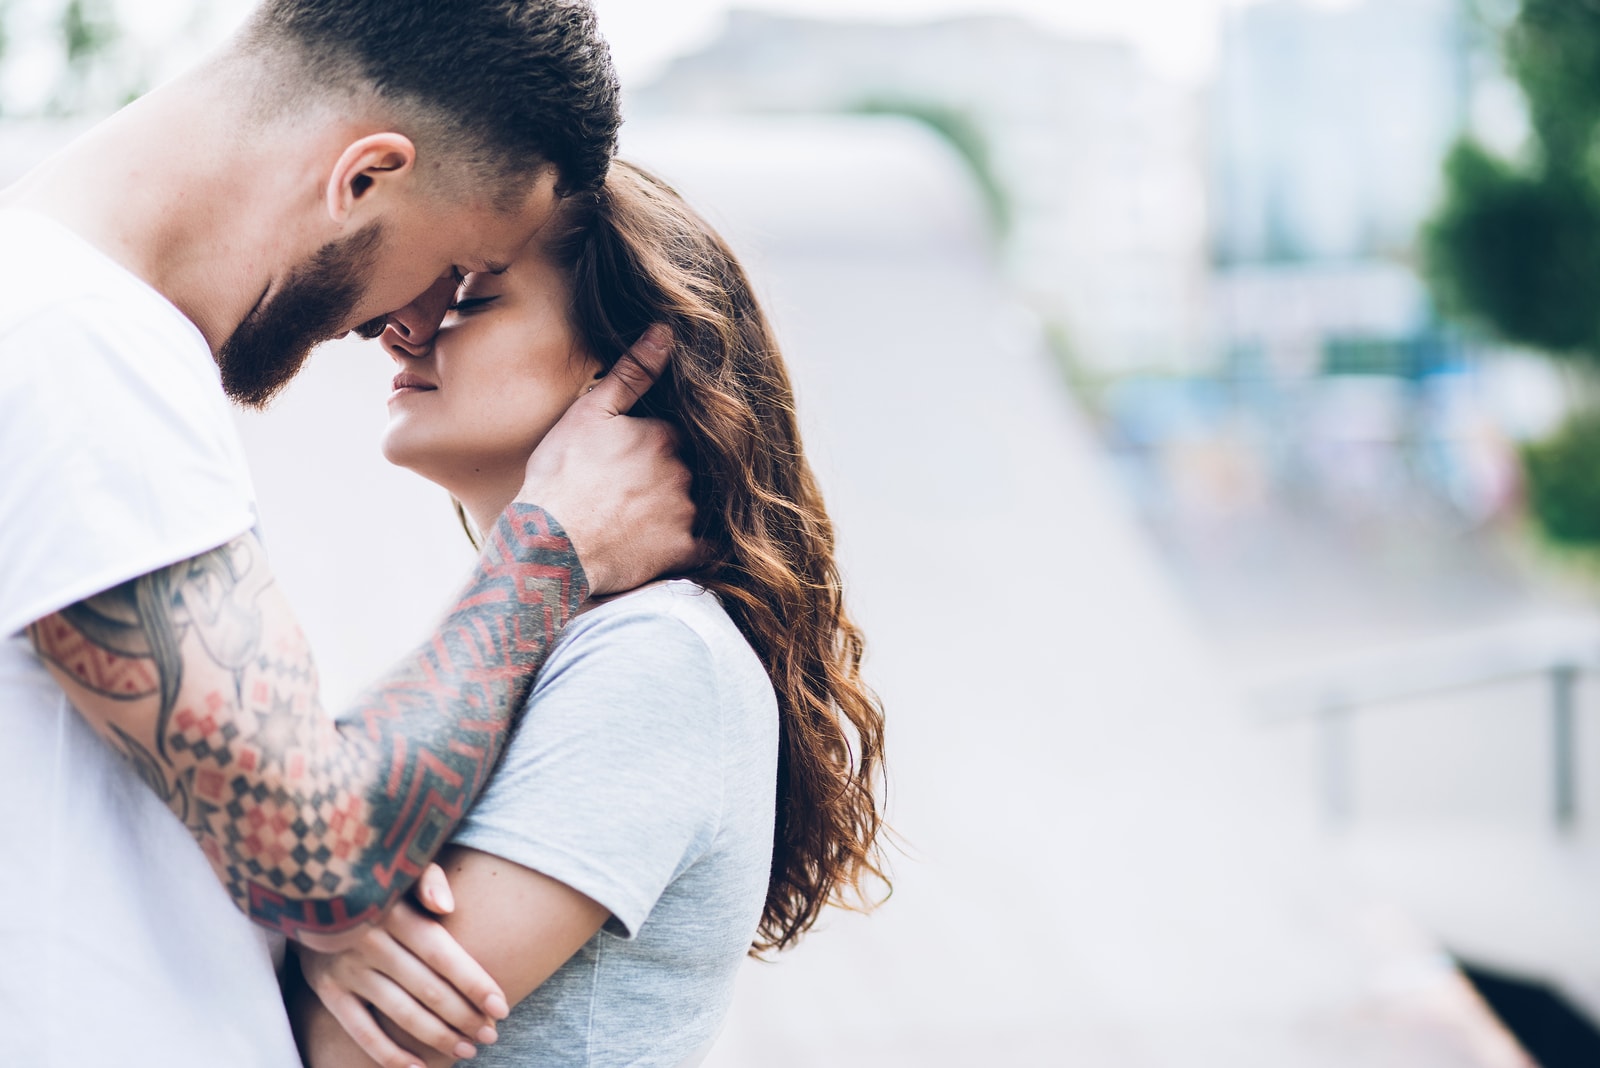 20 Perfectly Legit Reasons Why Men With Tattoos Are Every Girl’s Dream